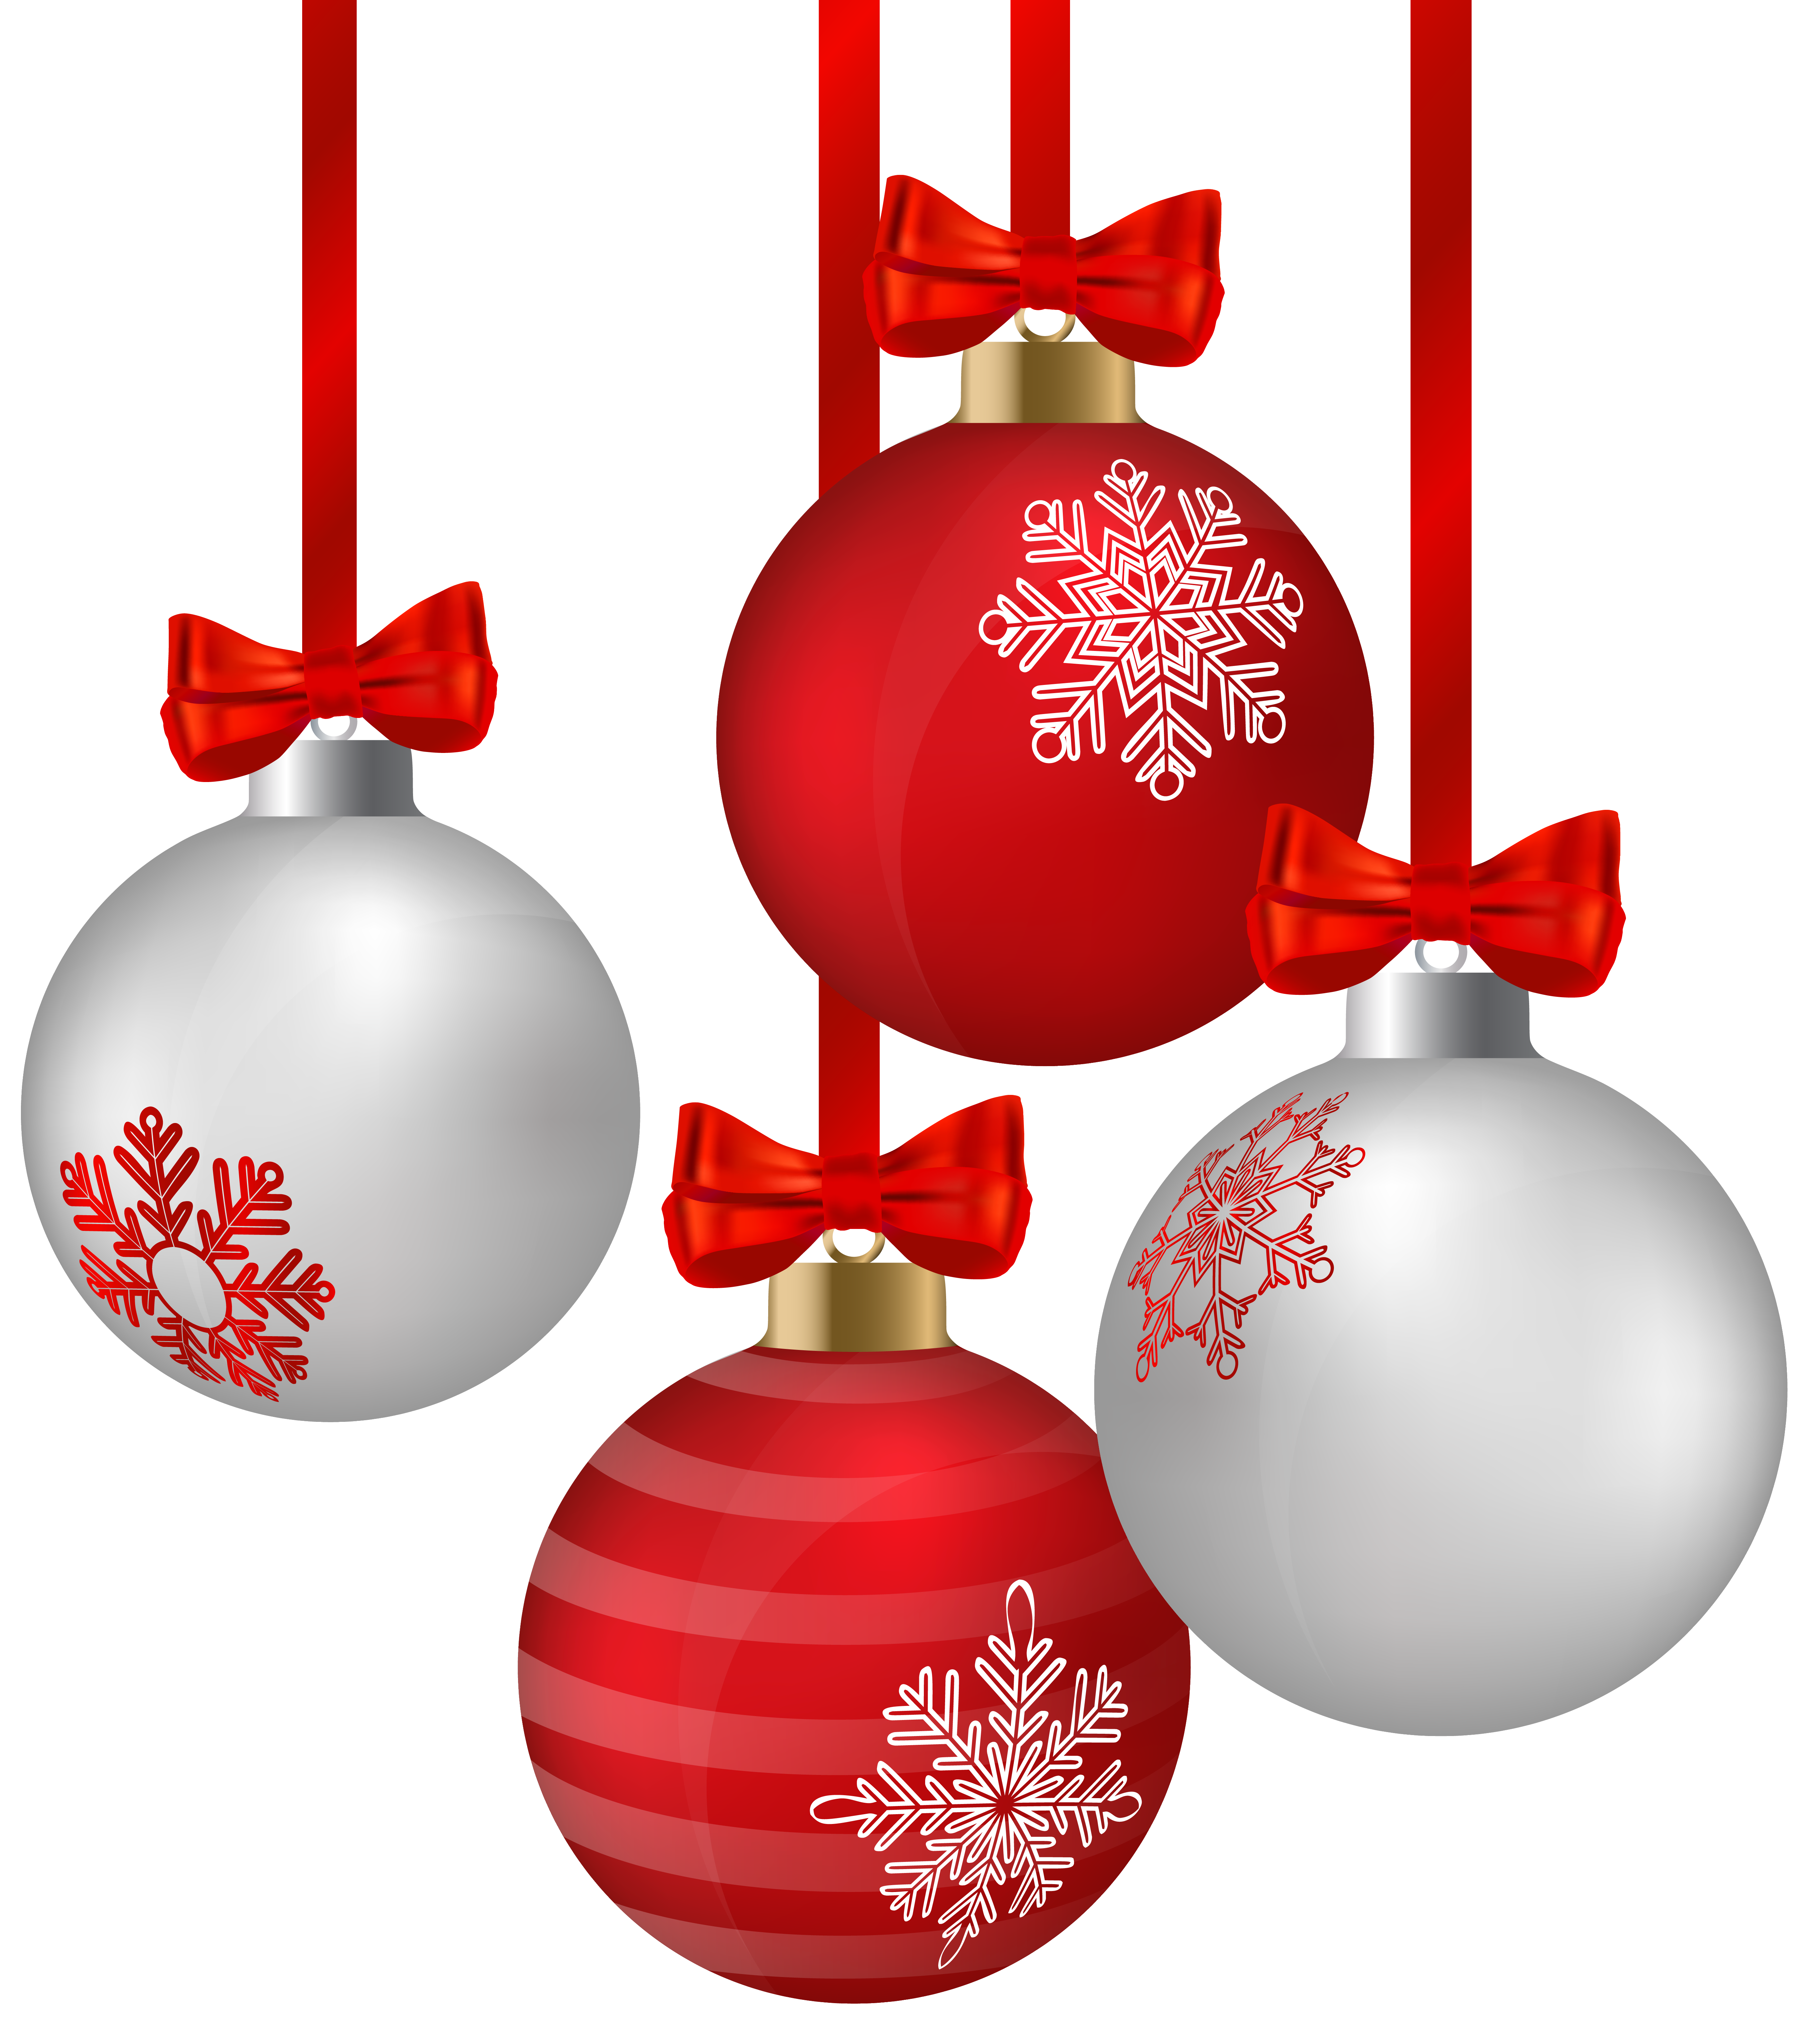 White and Red Hanging Christmas Ornaments PNG Clipart Image.